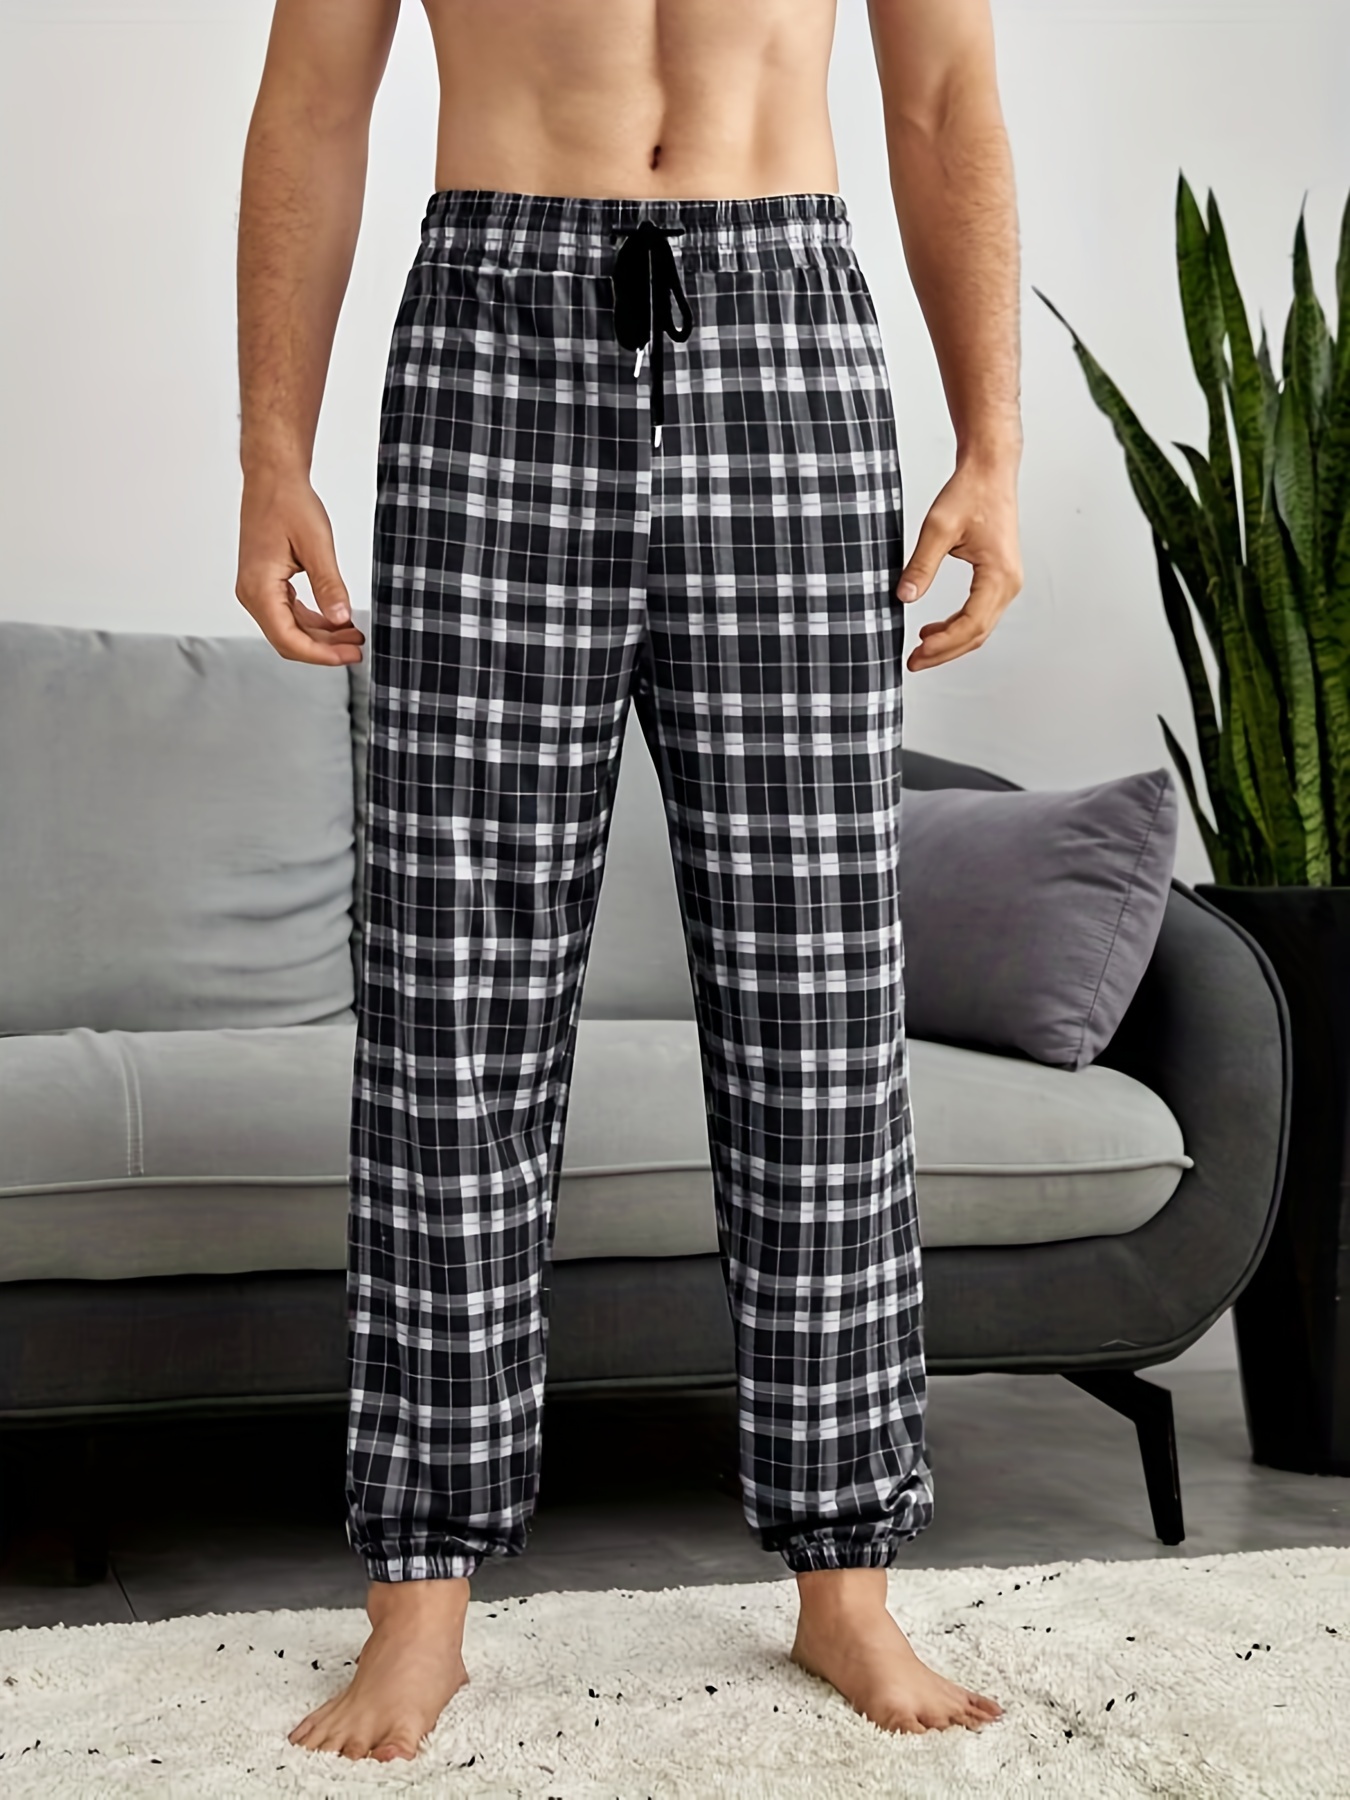 Mens Pajama Pants Red Plaid Soft Comfort Loose Casual Lounge Pants Warm  Sleepwear with Drawstring and Elastic Waist at  Men's Clothing store